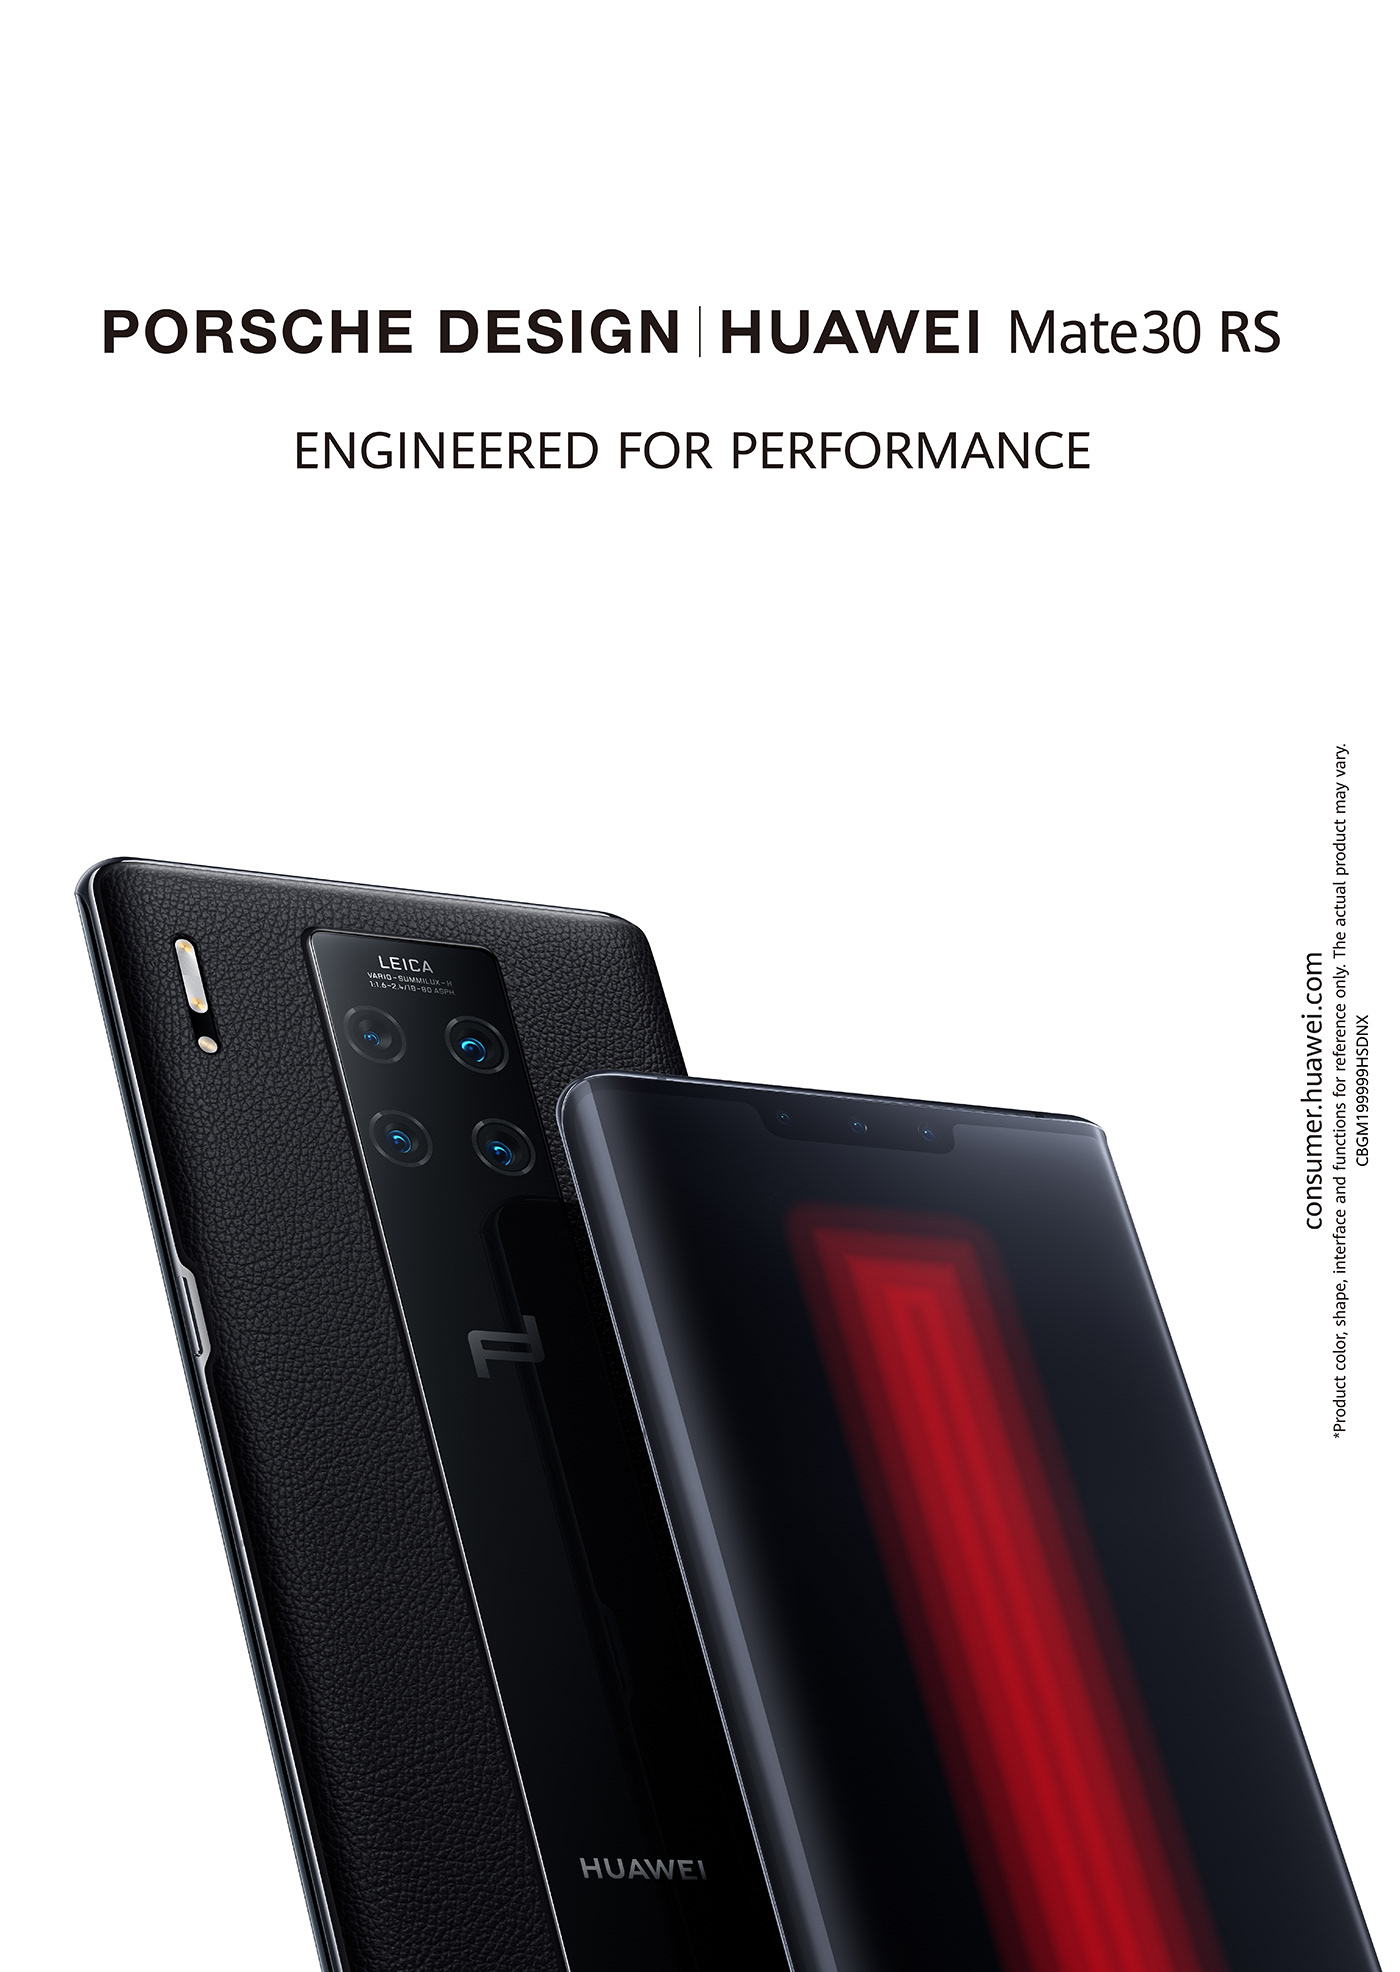 dongho lee. hello masters huawei huawei mate 30 Huawei product video Master Pictures Mate 30 RS Porsche porsche design Promo Film